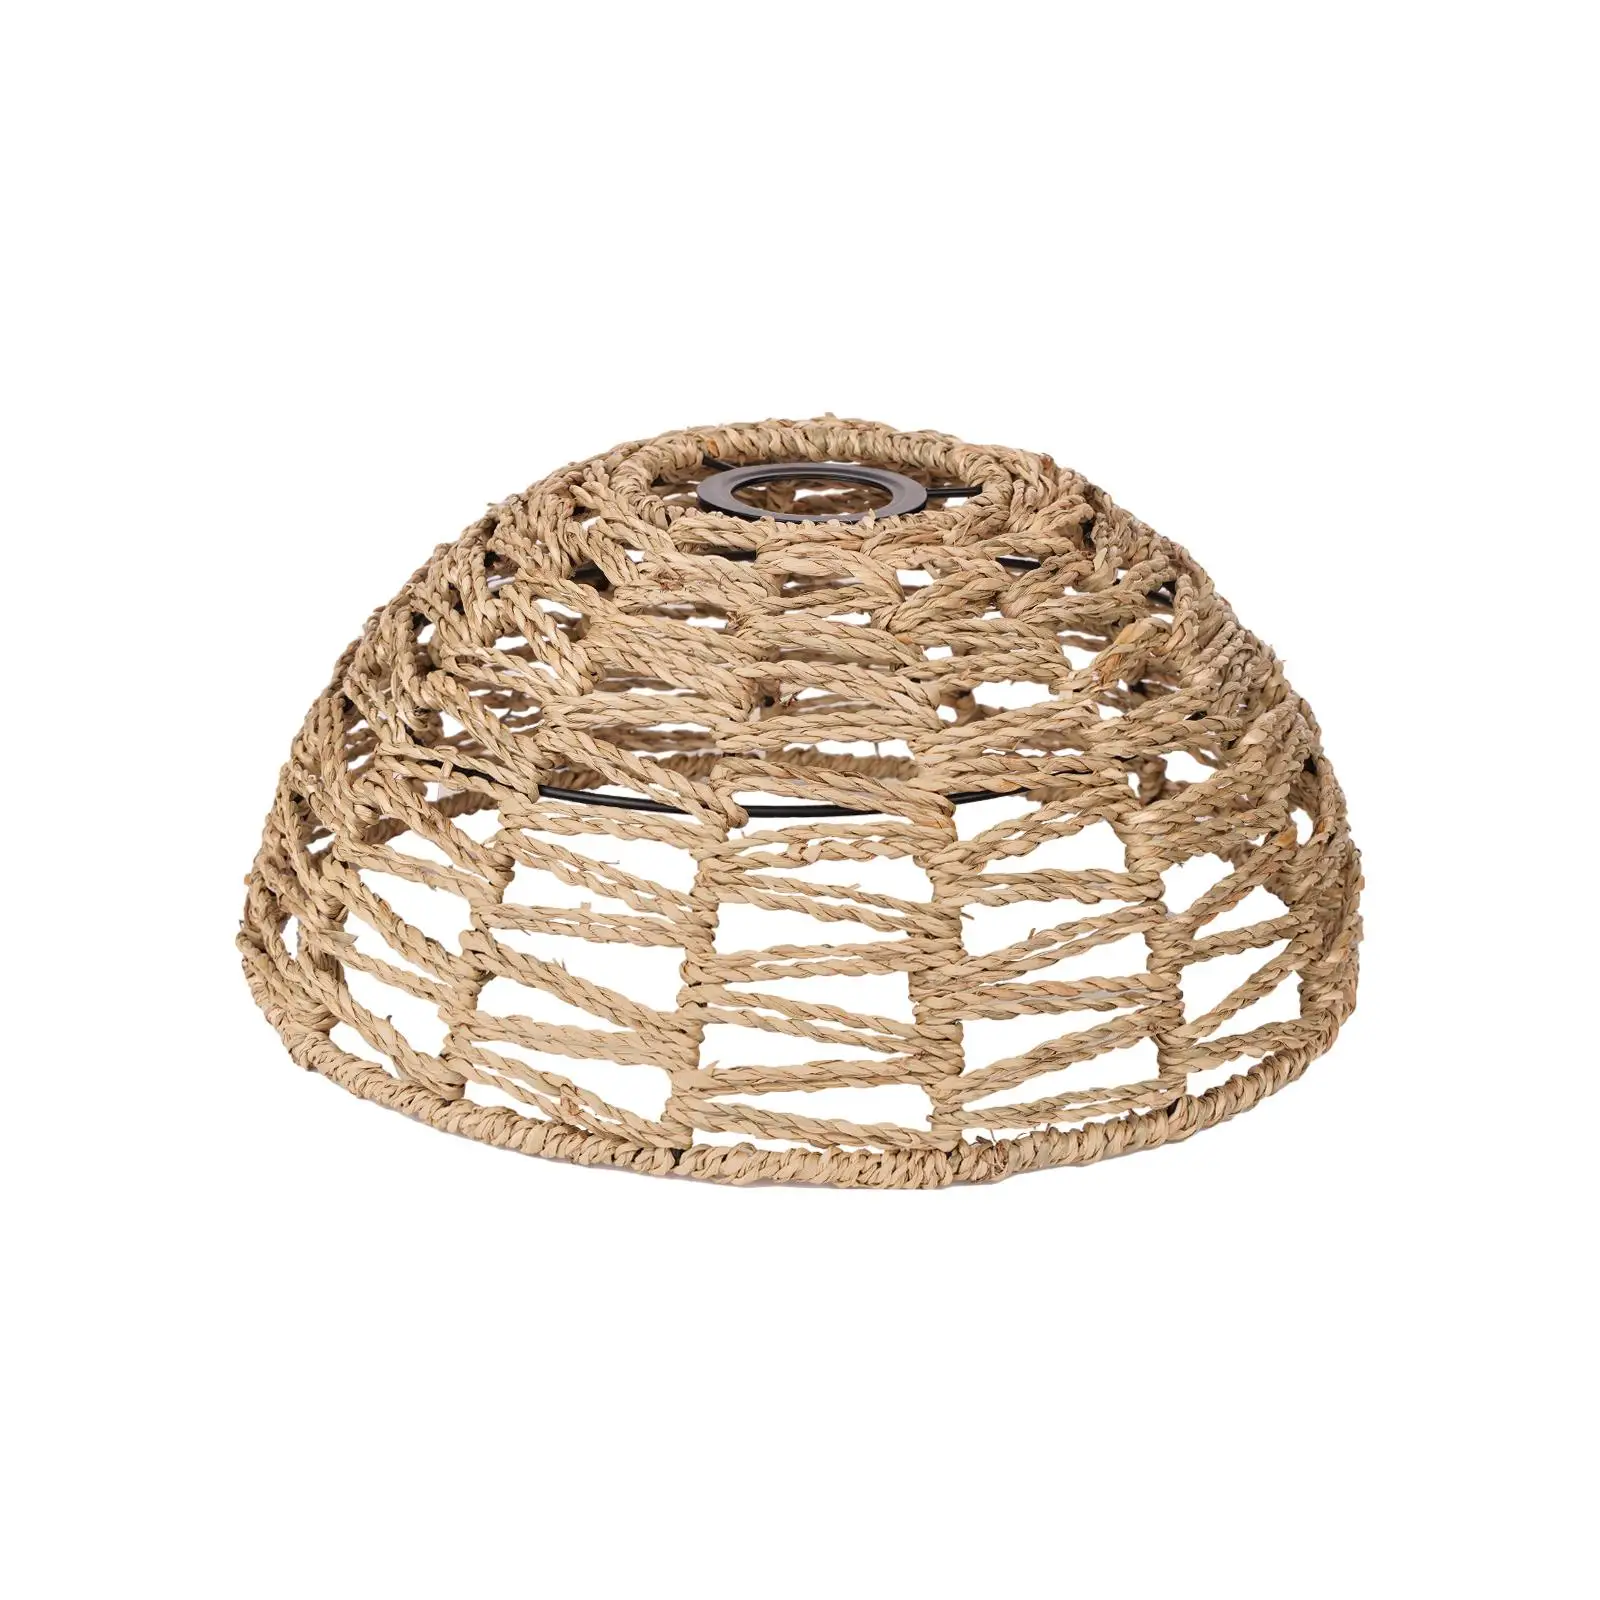 Rope Woven Lampshade Dustproof Accessories Decor Elegant Light Fixture Lamp Shade for Kitchen Bedroom Dining Table Home